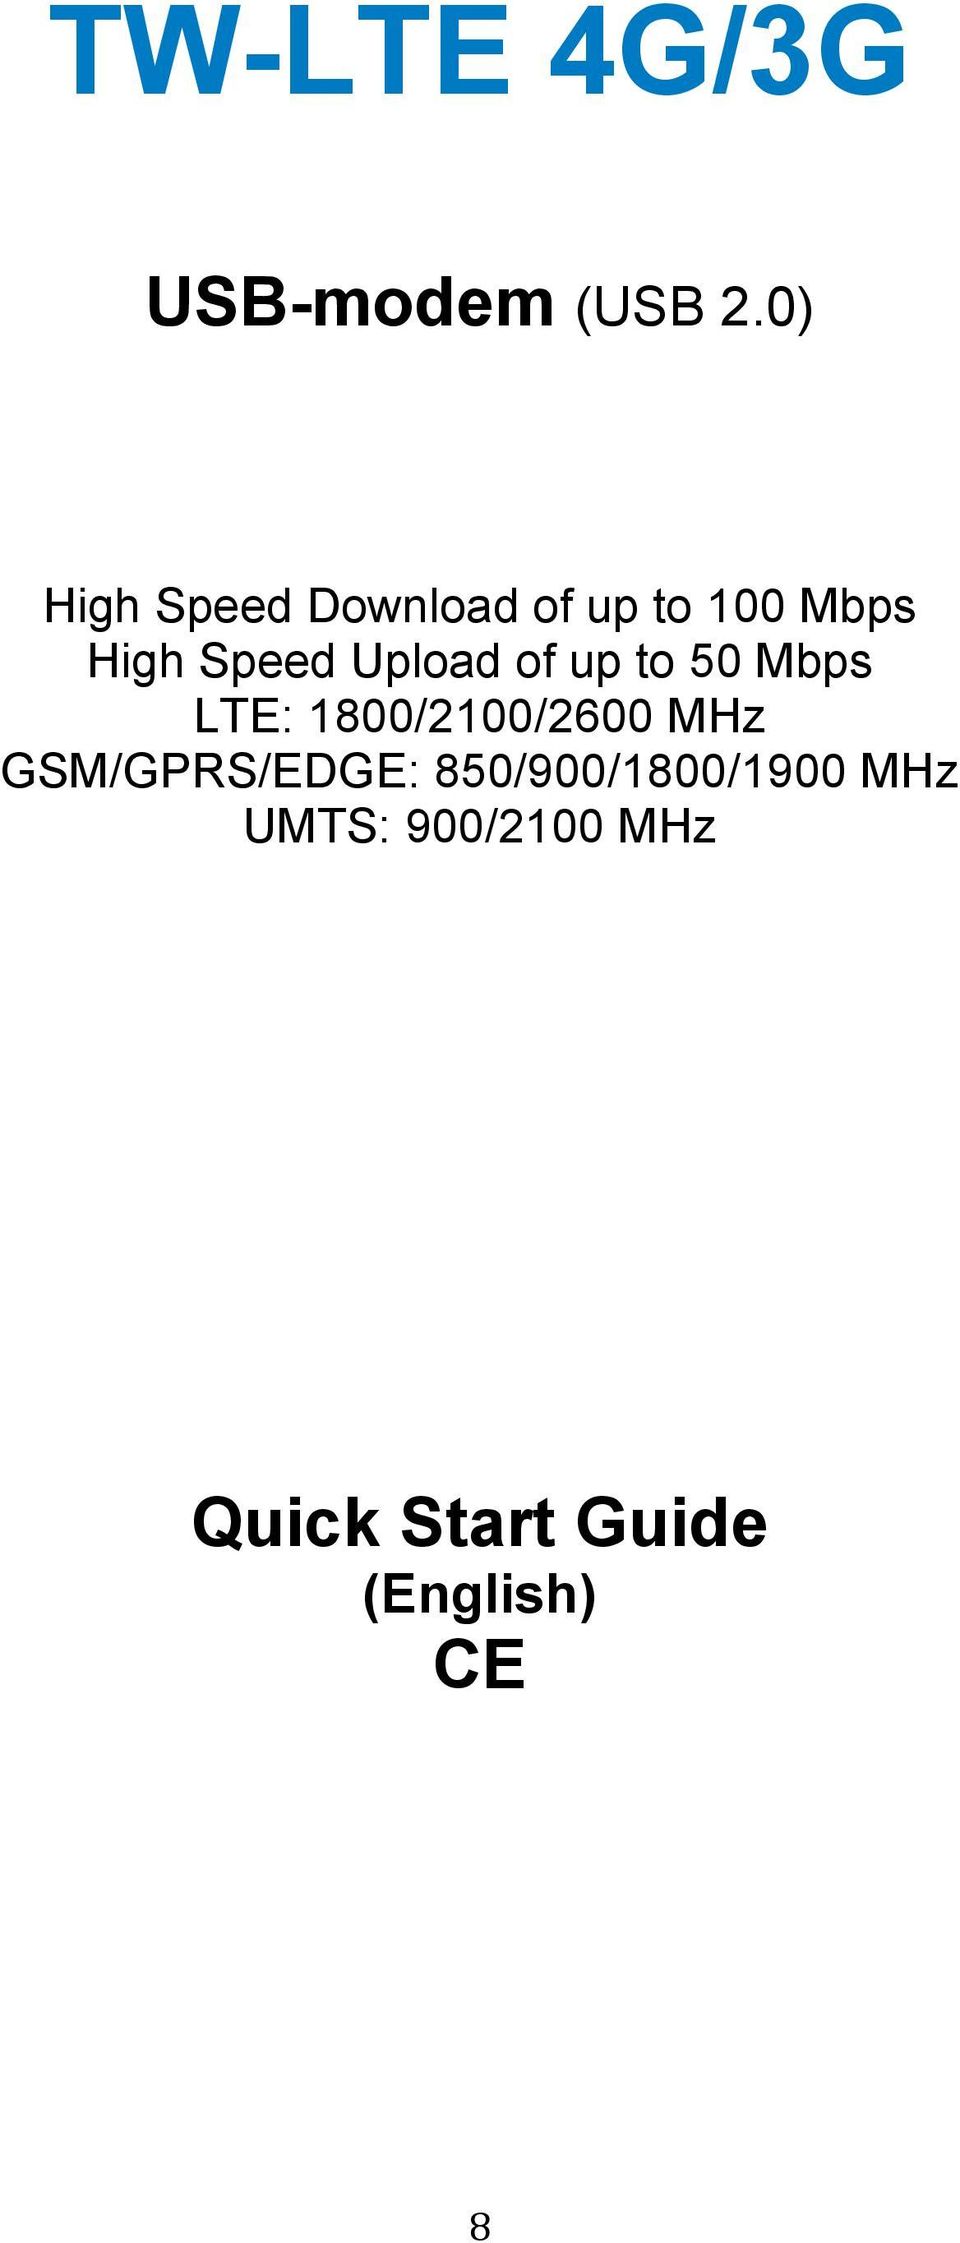 Upload of up to 50 Mbps LTE: 1800/2100/2600 MHz